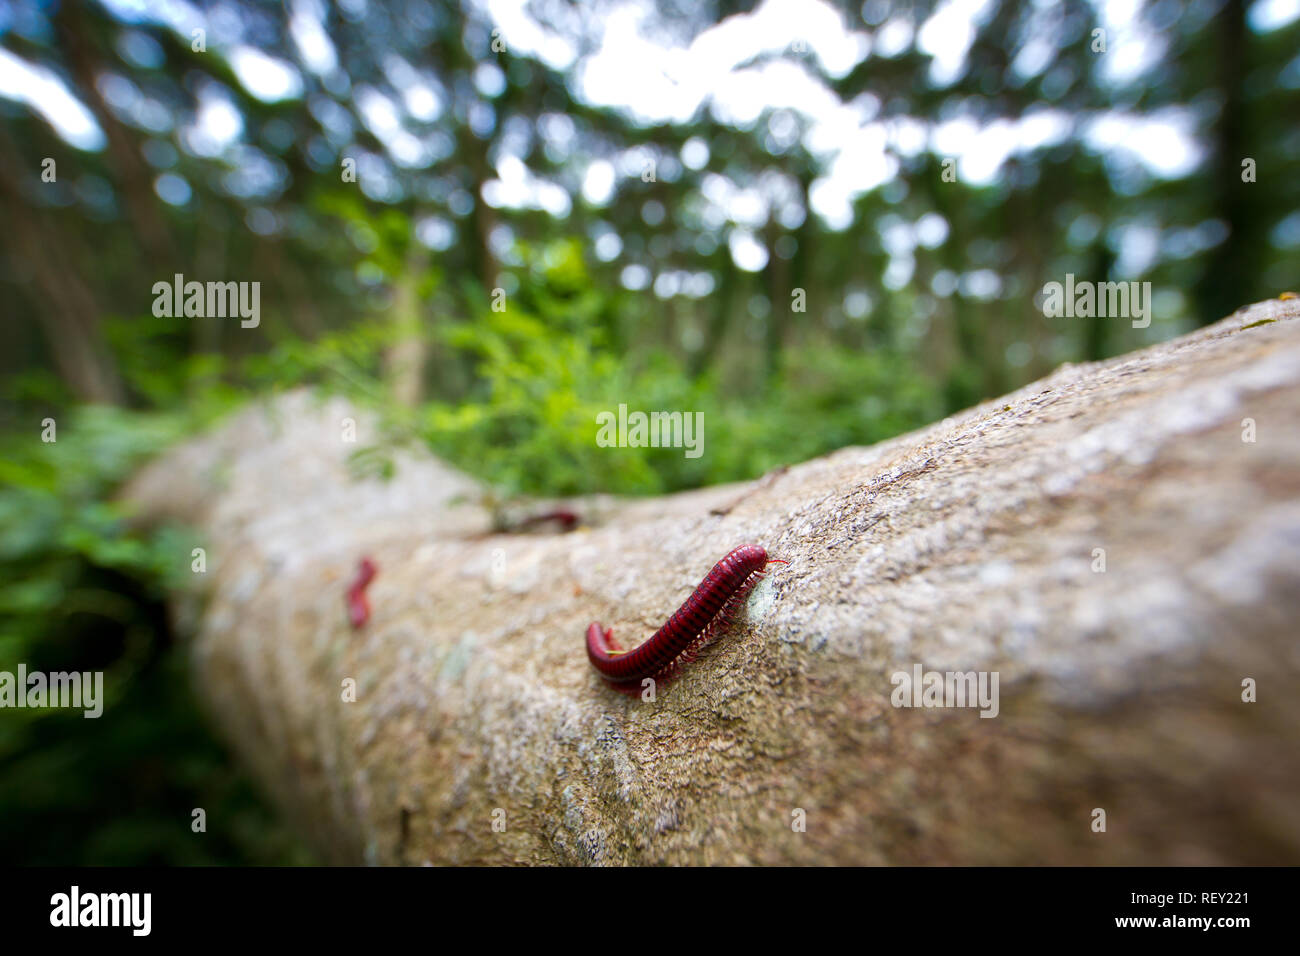 Millipedes like these Centrobolus fulgidus are important decomposers in forest and woodland ecosystems. Stock Photo